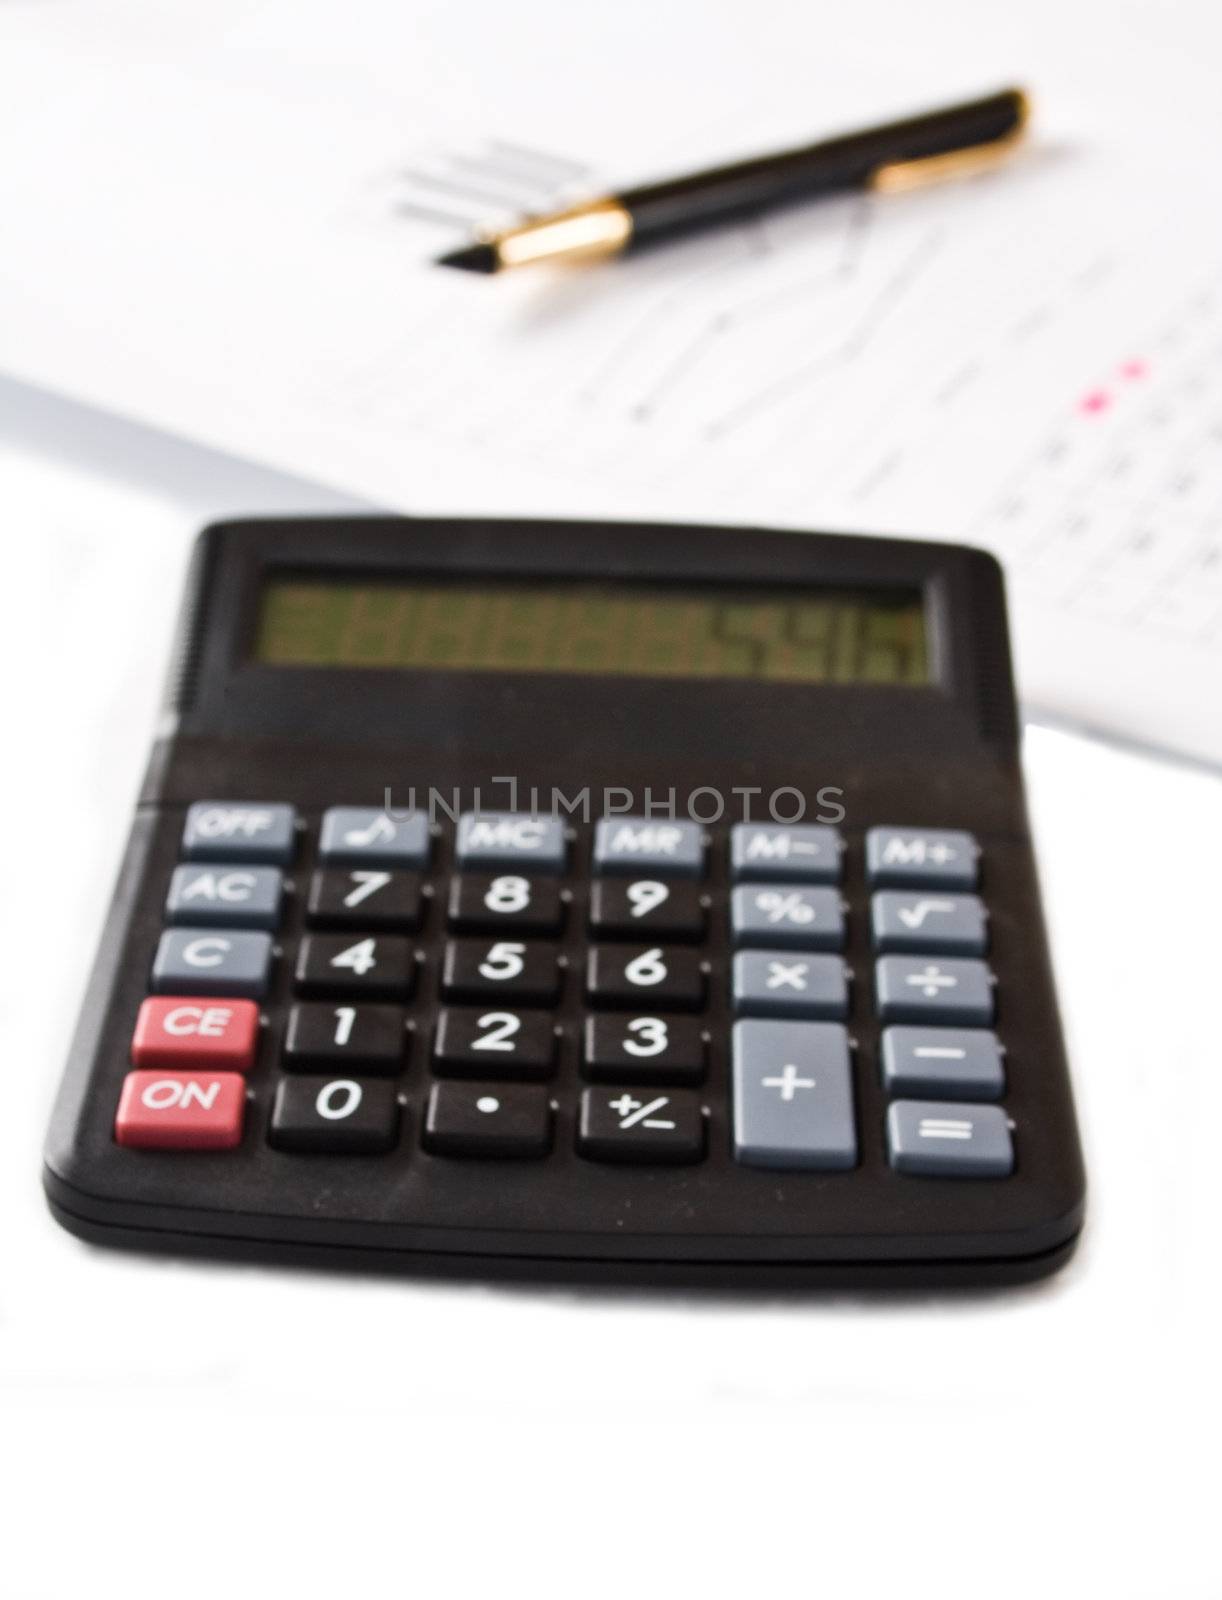 Calculator in the foreground and background of the handle and figures